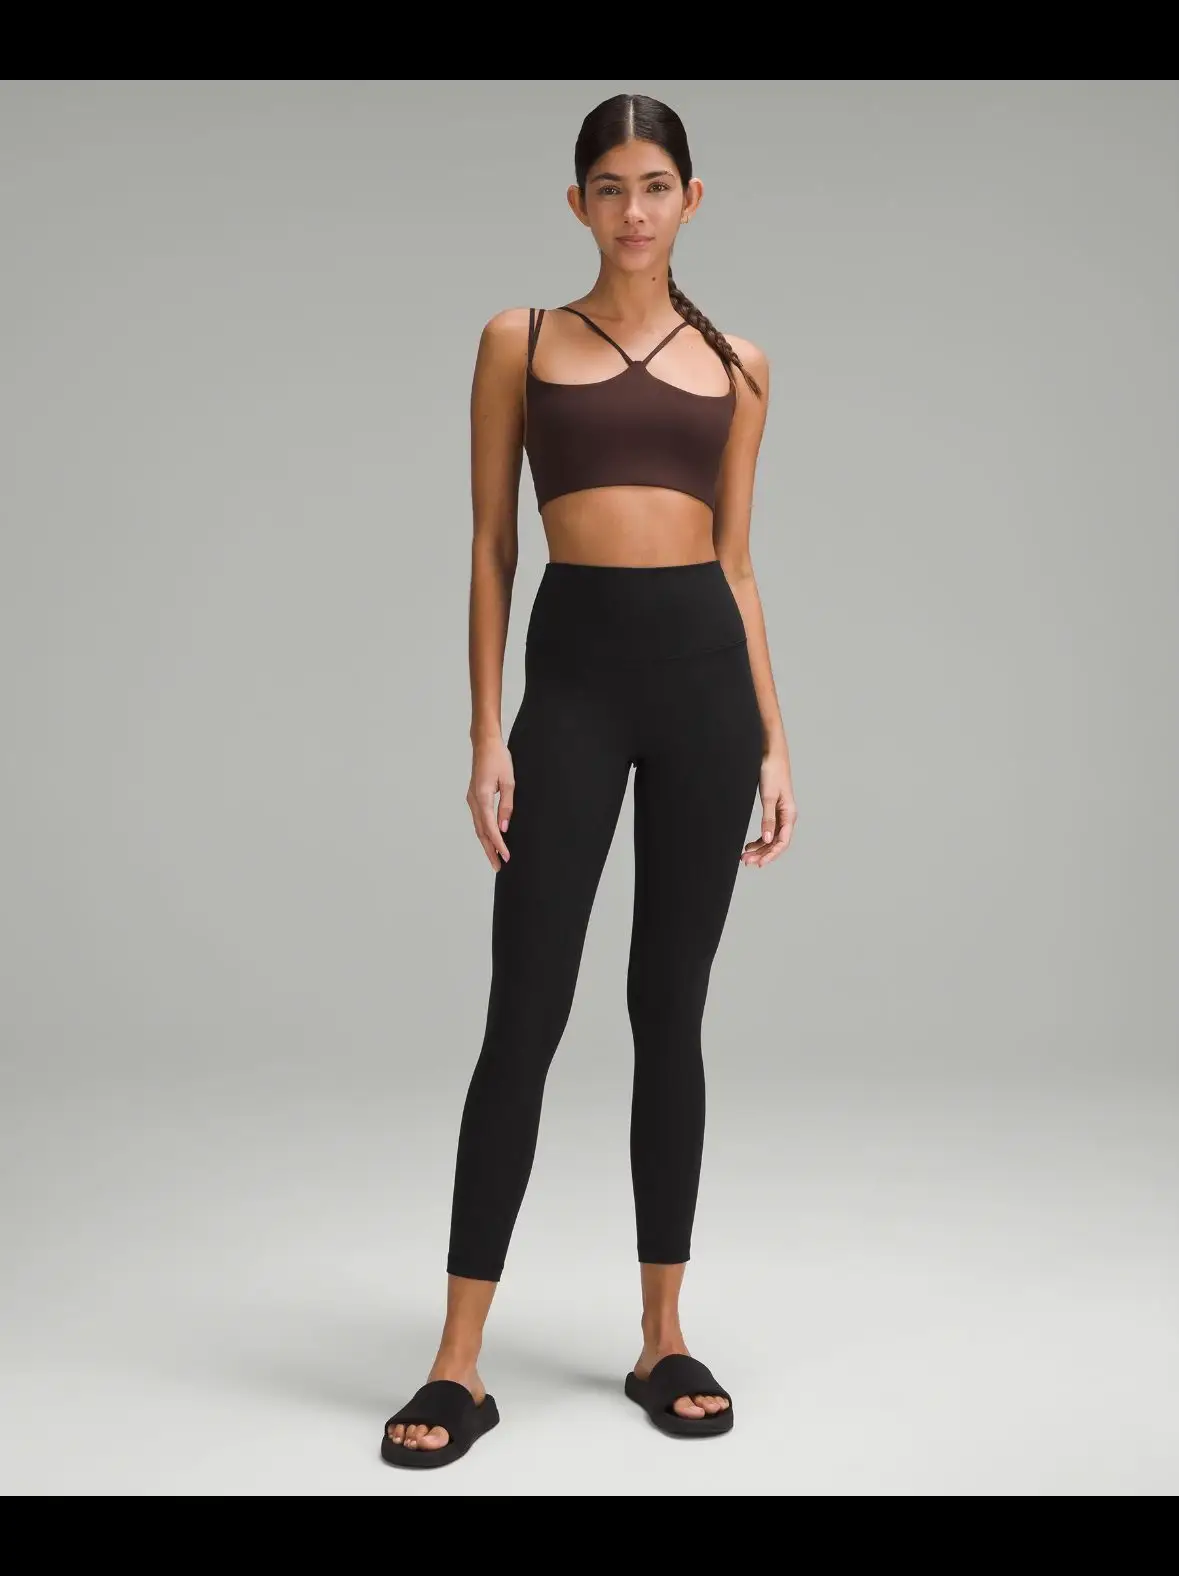 Align bodysuit….loved it but wish there was a 6 in option😭have to think on  it : r/lululemon